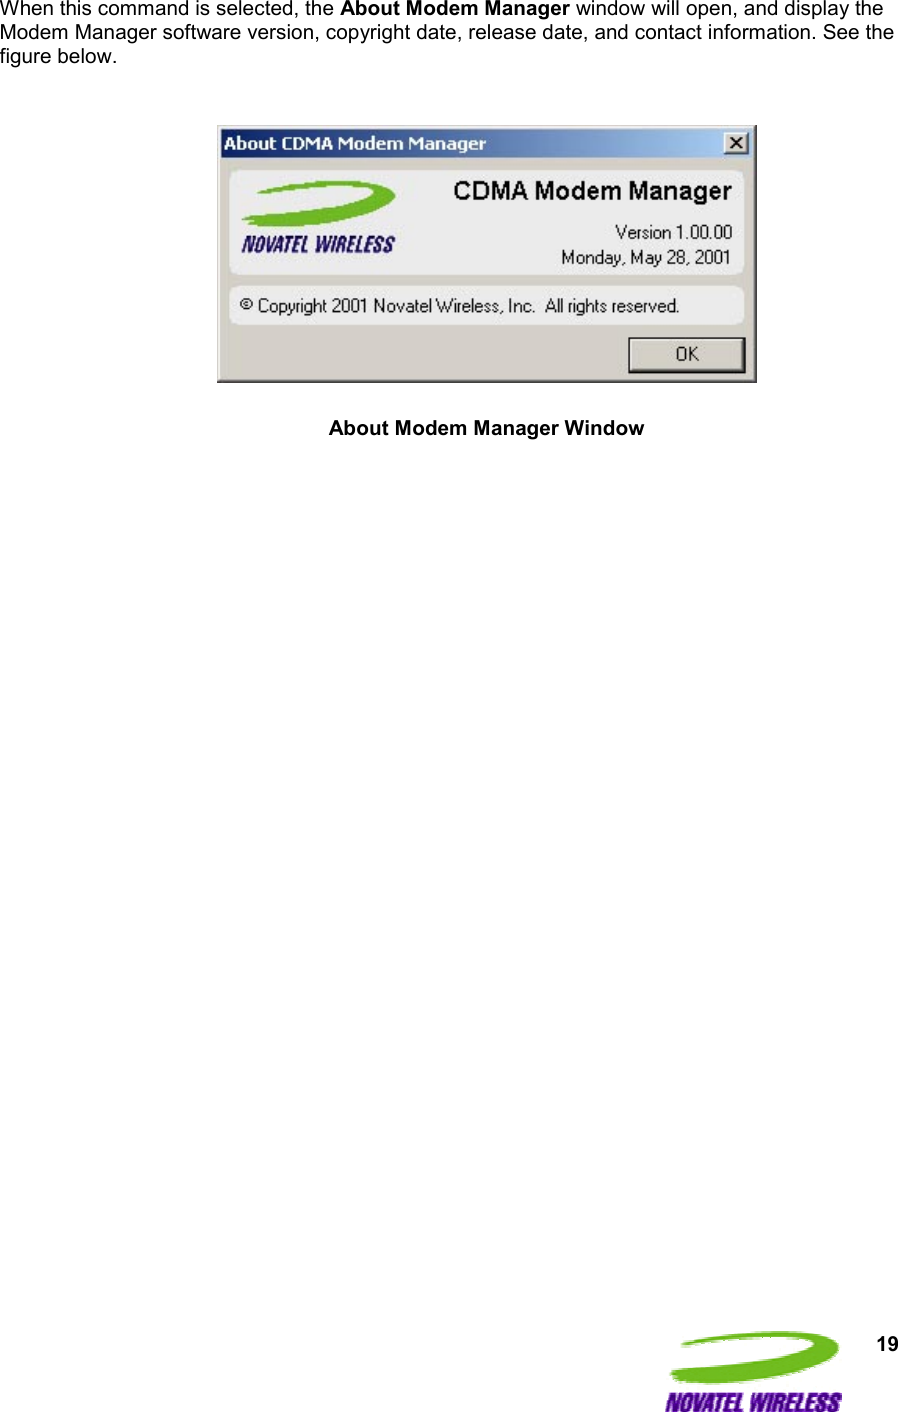  19 When this command is selected, the About Modem Manager window will open, and display the Modem Manager software version, copyright date, release date, and contact information. See the figure below.    About Modem Manager Window  